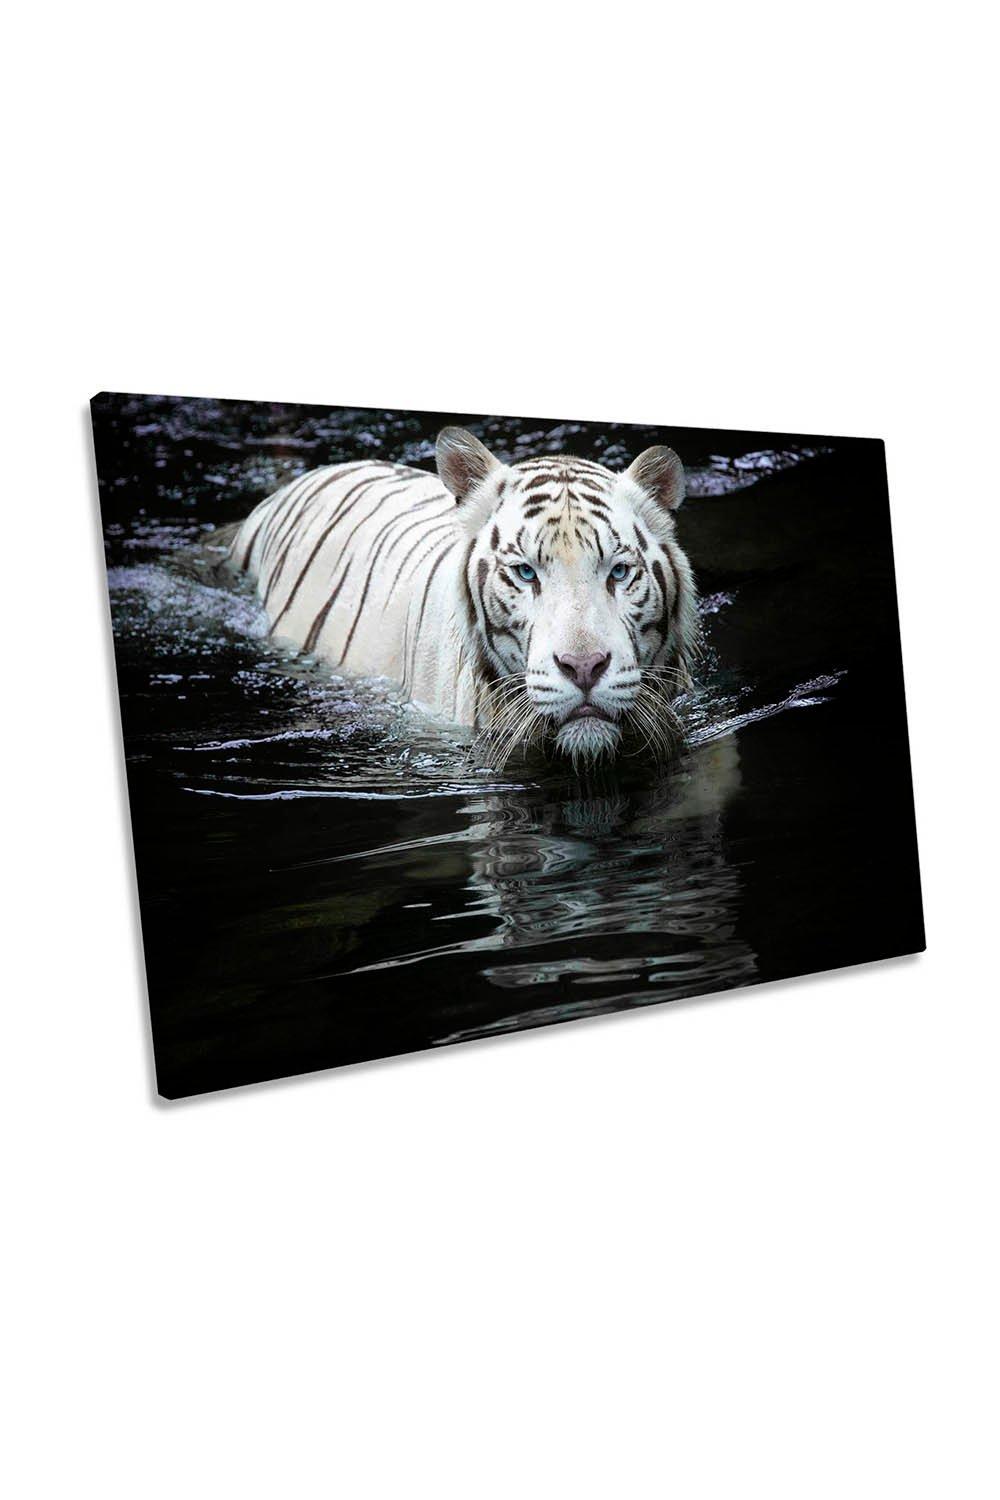 Looking at You White Tiger Canvas Wall Art Picture Print